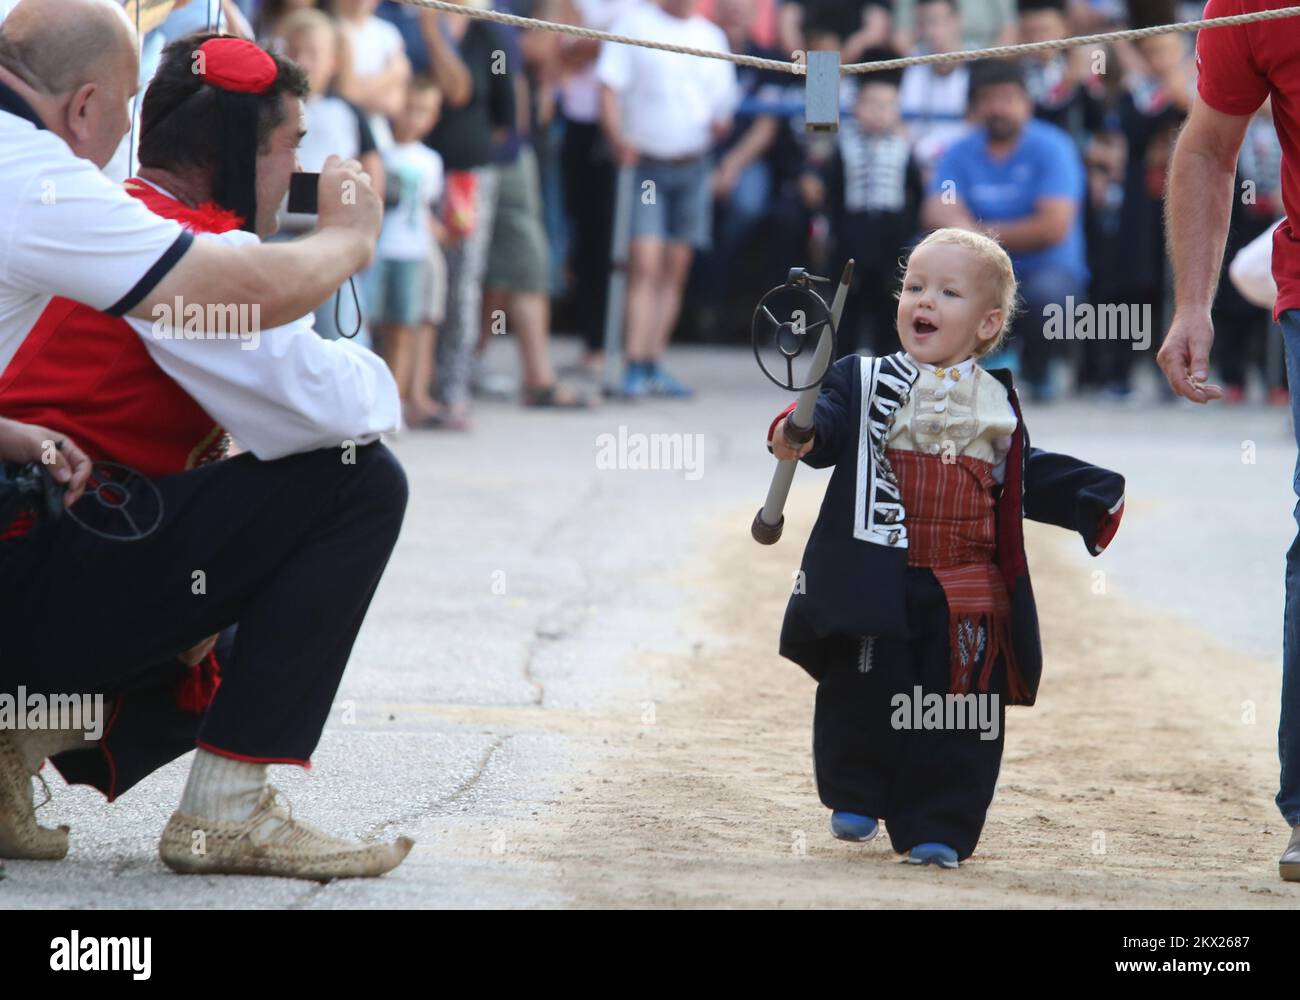 20.08.2017., Brnaze, Croatia - Alkar Veseli (Happy) runs during the Children's Alka tournament in Vuckovici village, Croatia, August 20, 2017. Children's Alka is a tournament which has been held every August in the Croatian village of Vuckovici since 1955. in memory of their ancestors Father Pavao, Boze, Tadija and Zec, whose heroism and bravery made them become prominent in the decisive battle against the Ottomans in 1715. Only boys up to 10 years can participate. Photo: Ivo Cagalj/PIXSELL Stock Photo